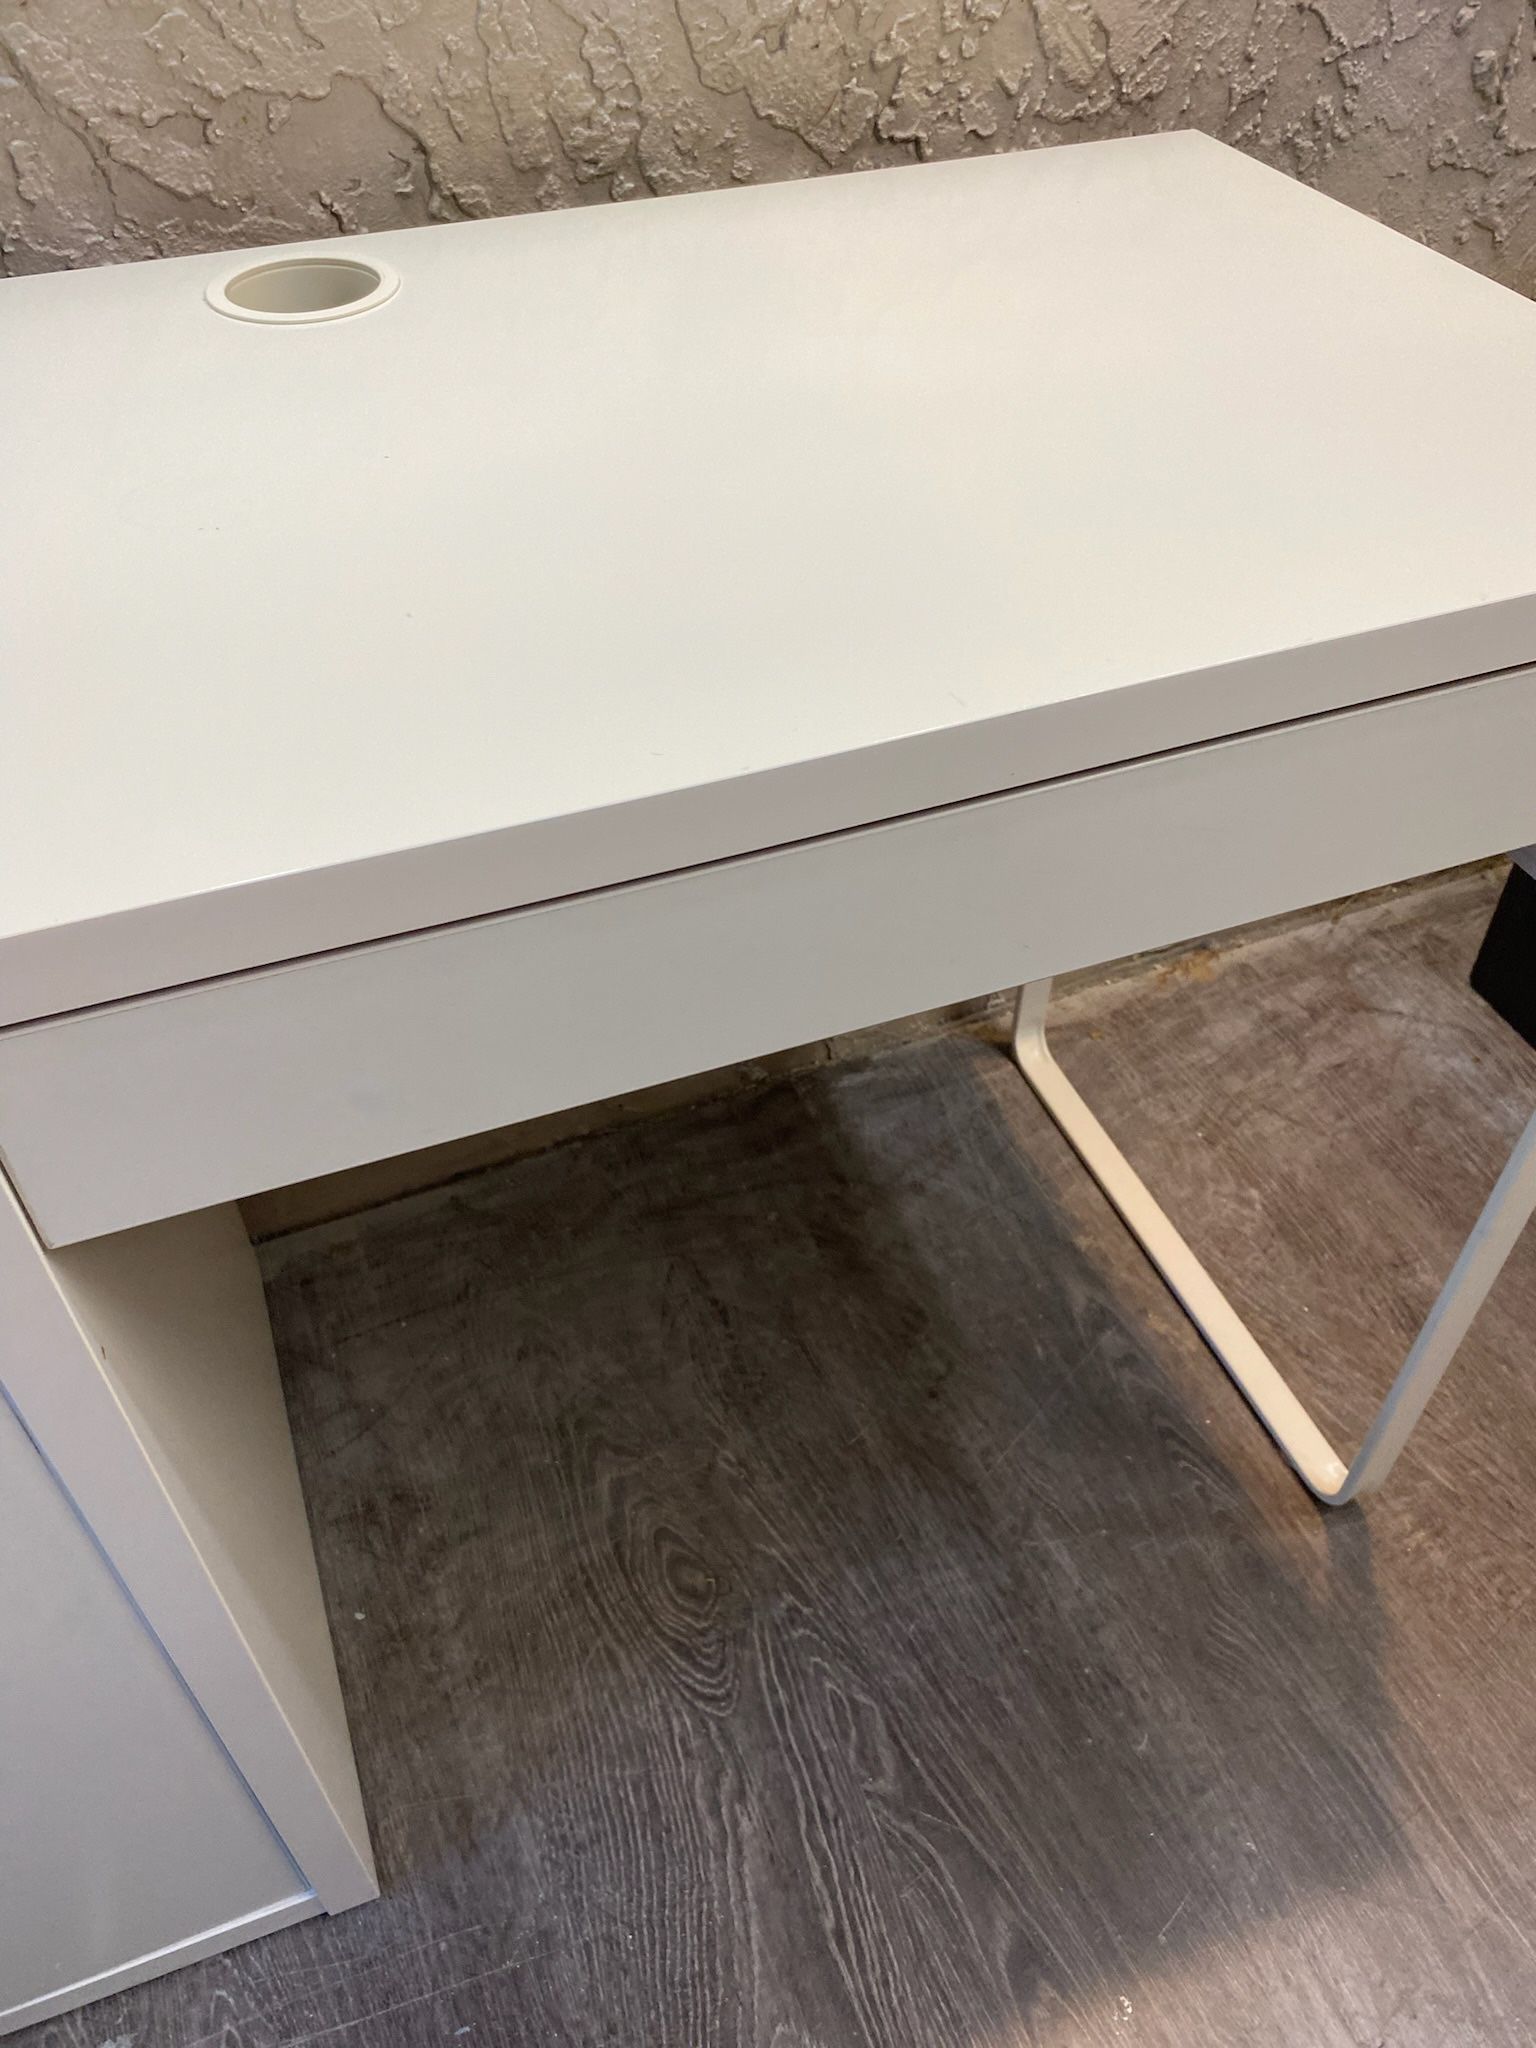 White Desk with Storage - Delivery Available for a Fee - See my other items 😁